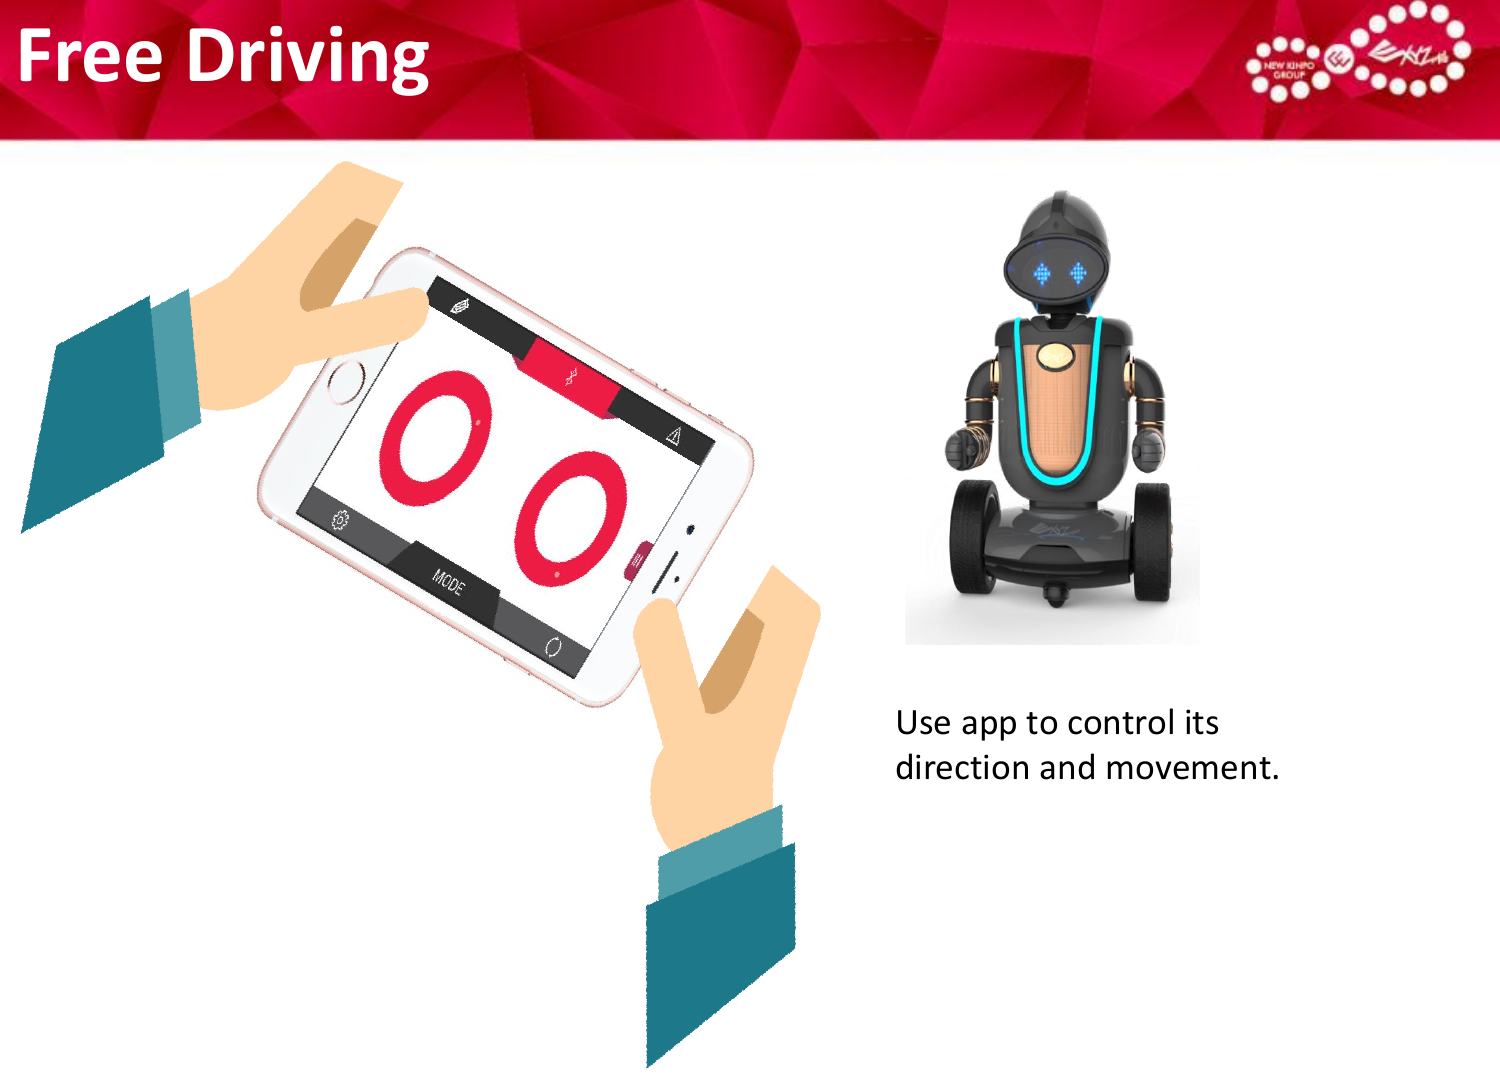 Free DrivingUse app to control its direction and movement.